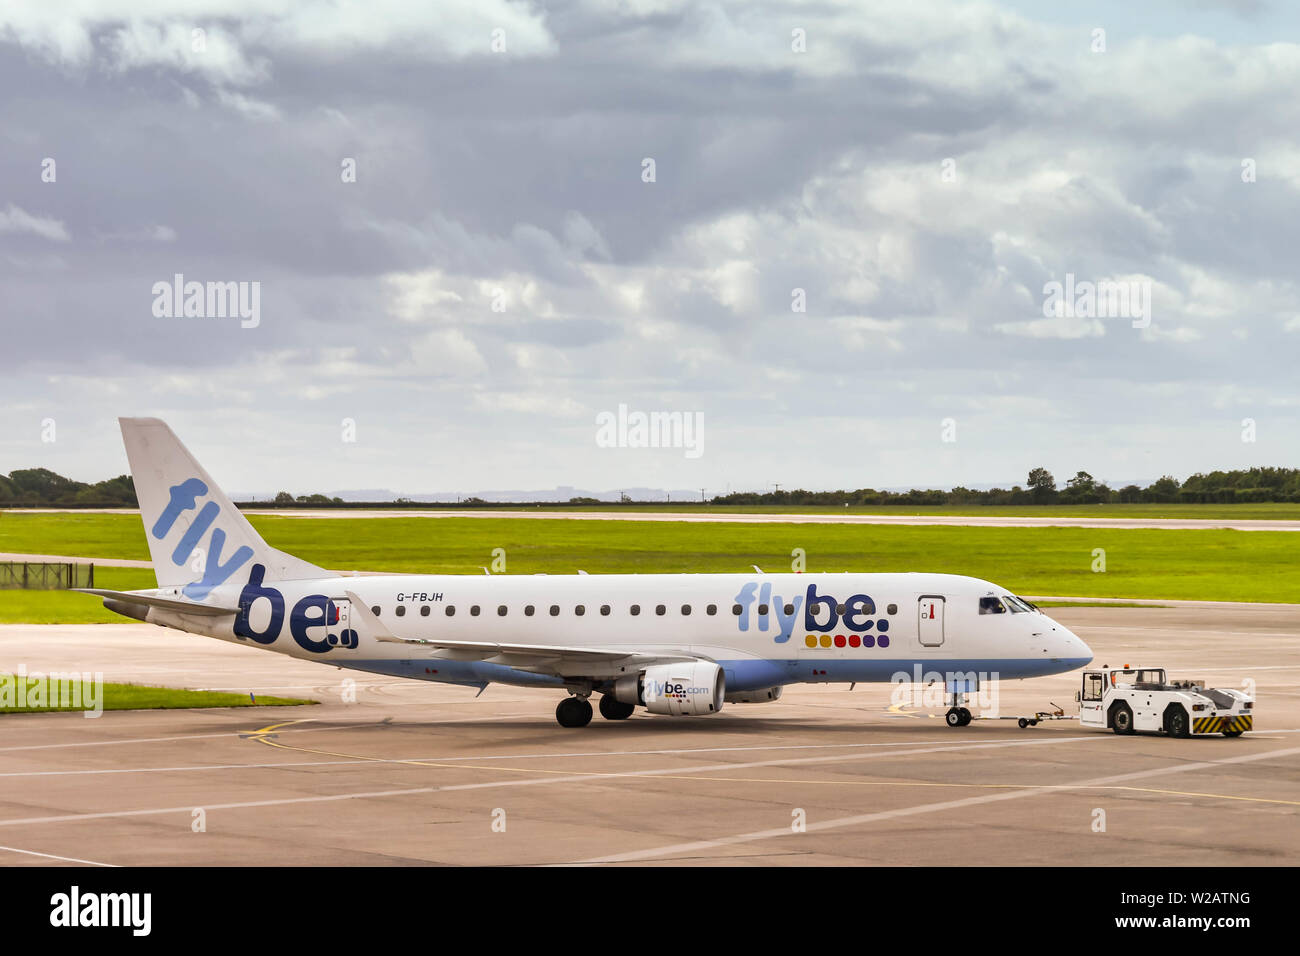 CARDIFF WALES AIRPORT - JUNE 2019: Flybe Embraer E175 plane being pushed by an airport tug for departure from Cardiff Wales Airport. Stock Photo